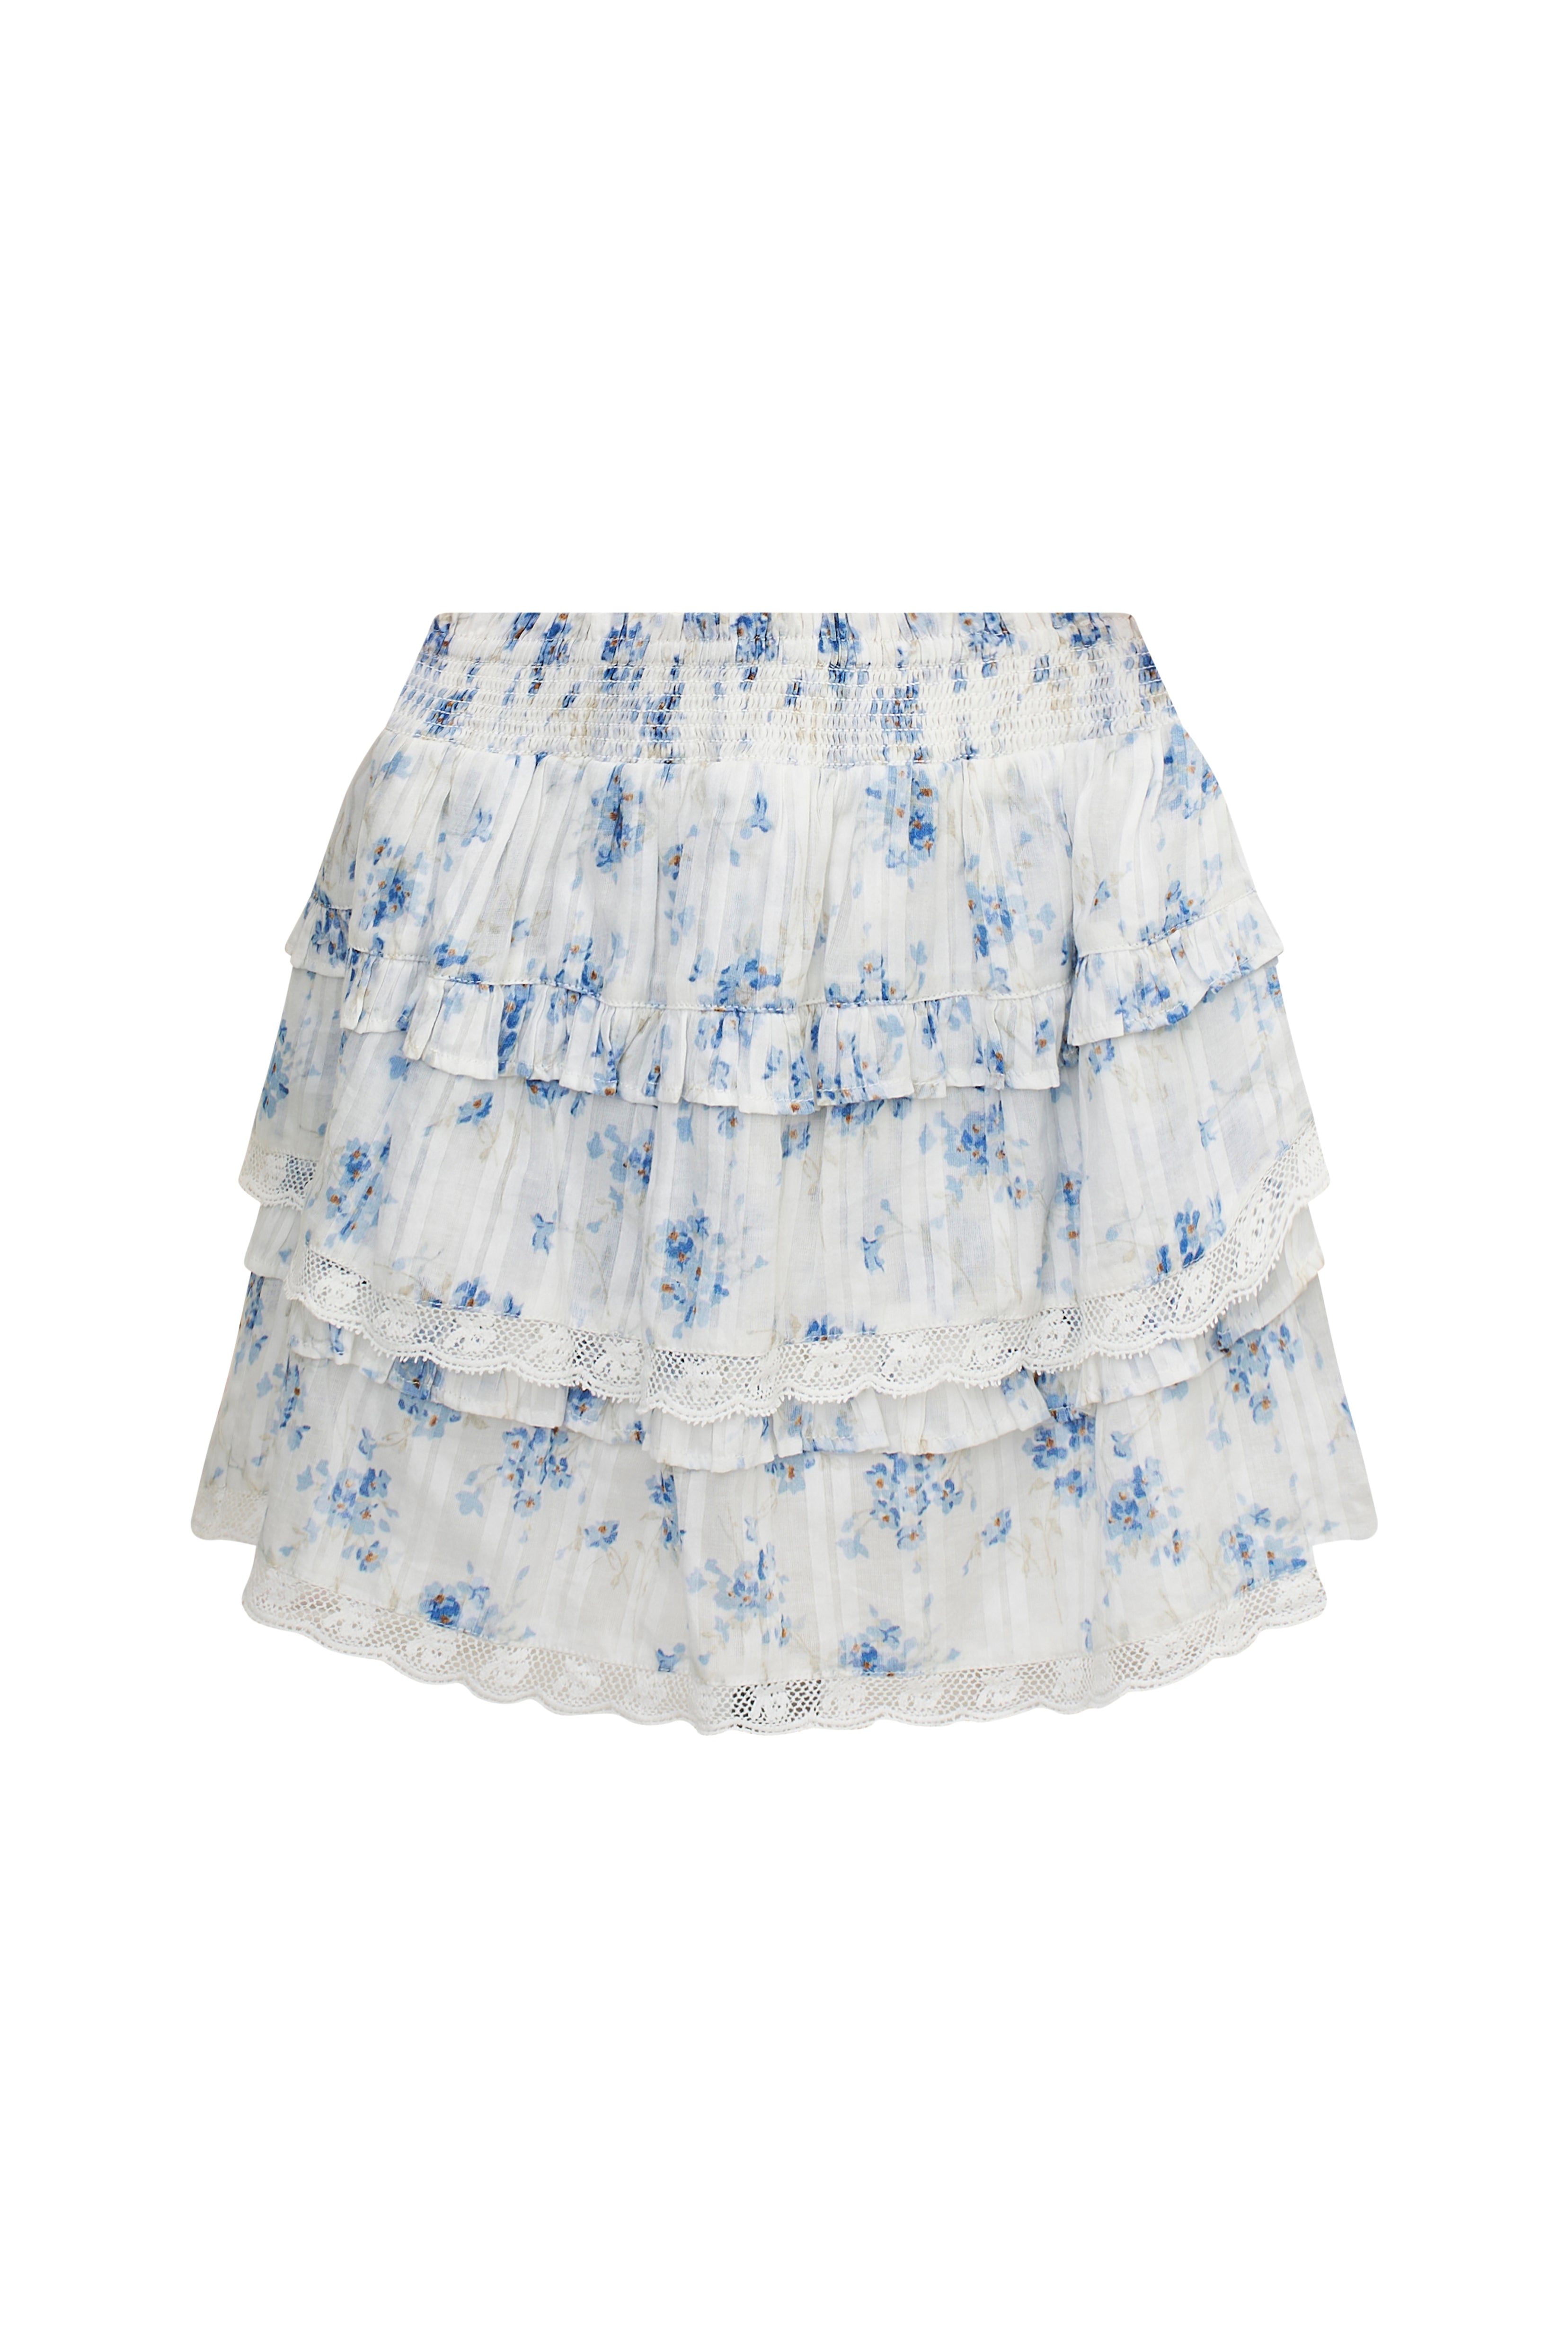 Two-tiered skirt with ruffles, a sky blue print and custom-lace embroidered tassels. 